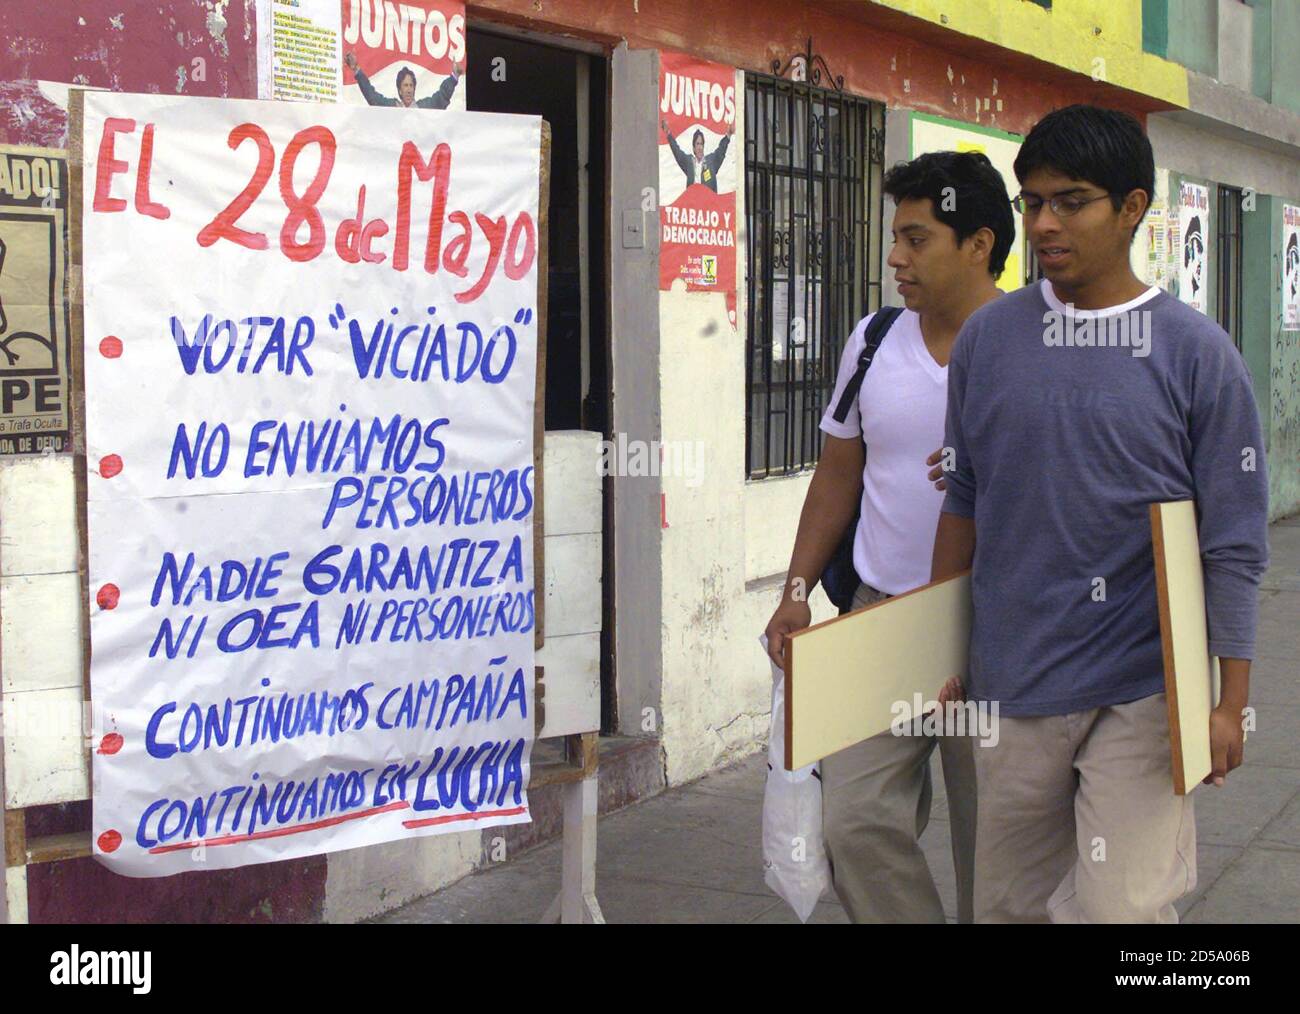 Lima residents walk past a sign calling for Peruvians to spoil their vote and boycott the controversial runoff presidential election between President Alberto Fujimori and Alejandro Toledo, May 27. Fujimori, already facing the opposition boycott of the vote, came under U.S. fire after his government pushed aside repeated calls to delay an election monitors have deemed unfair. The sign says, 'May 28. Spoiled vote. We don't send people to the voting stations. Nor the OAS observers nor our people will observe the voting. We keep on campaigning. We continue the battle.  RR/JP Stock Photo